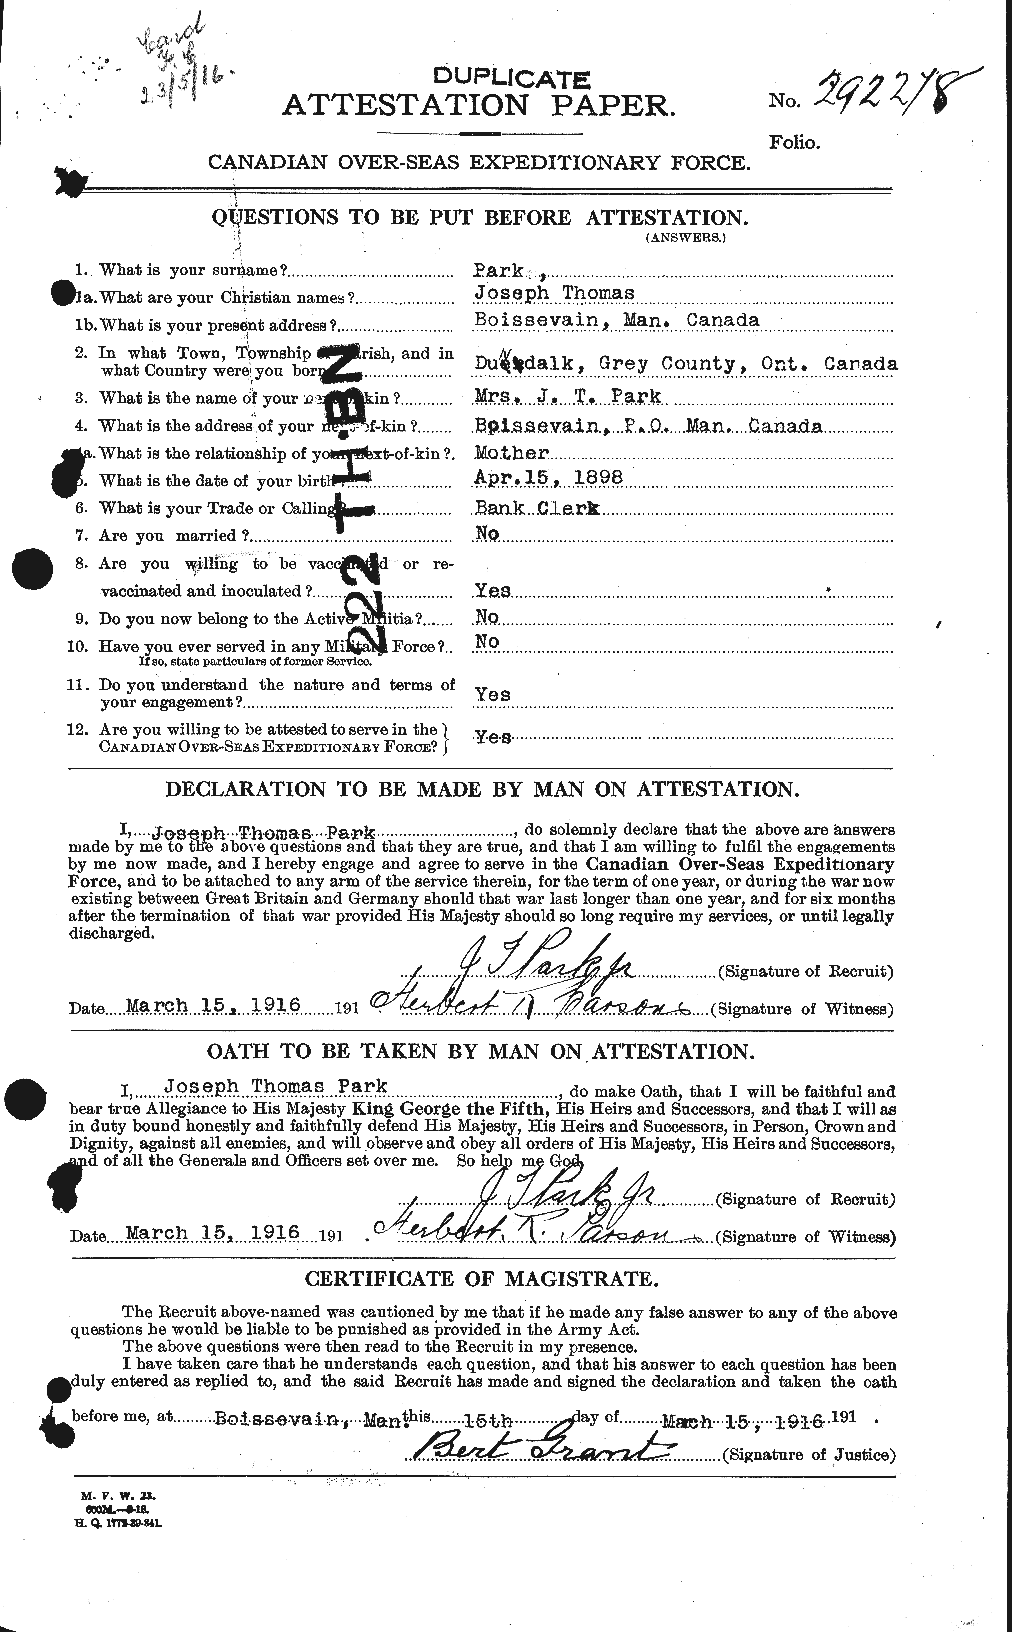 Personnel Records of the First World War - CEF 564843a